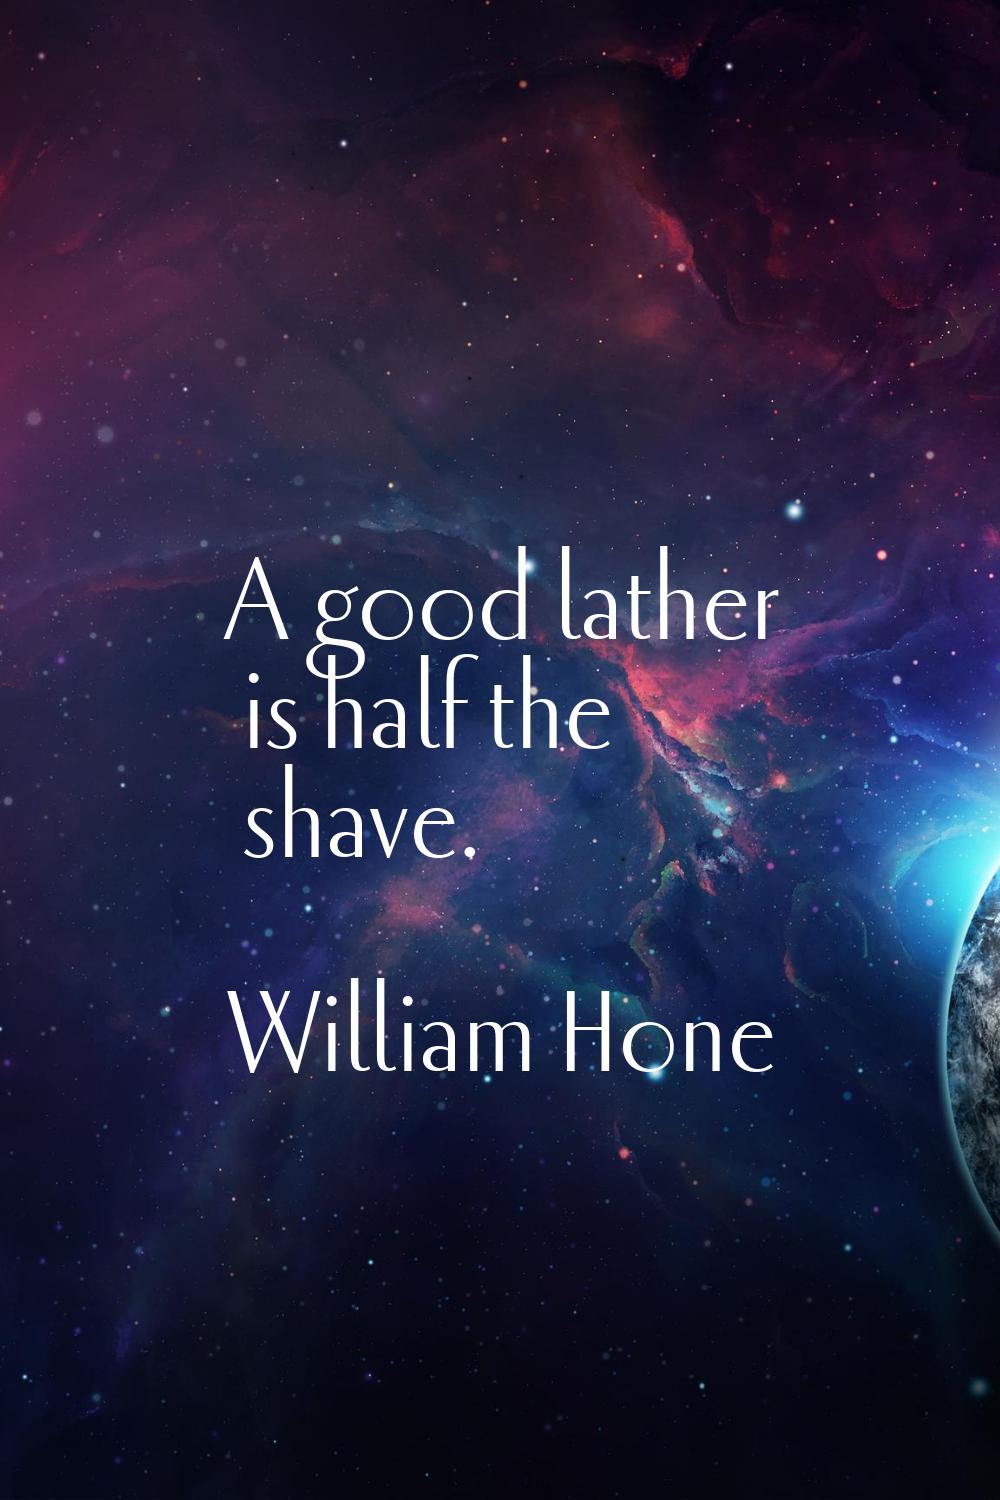 A good lather is half the shave.